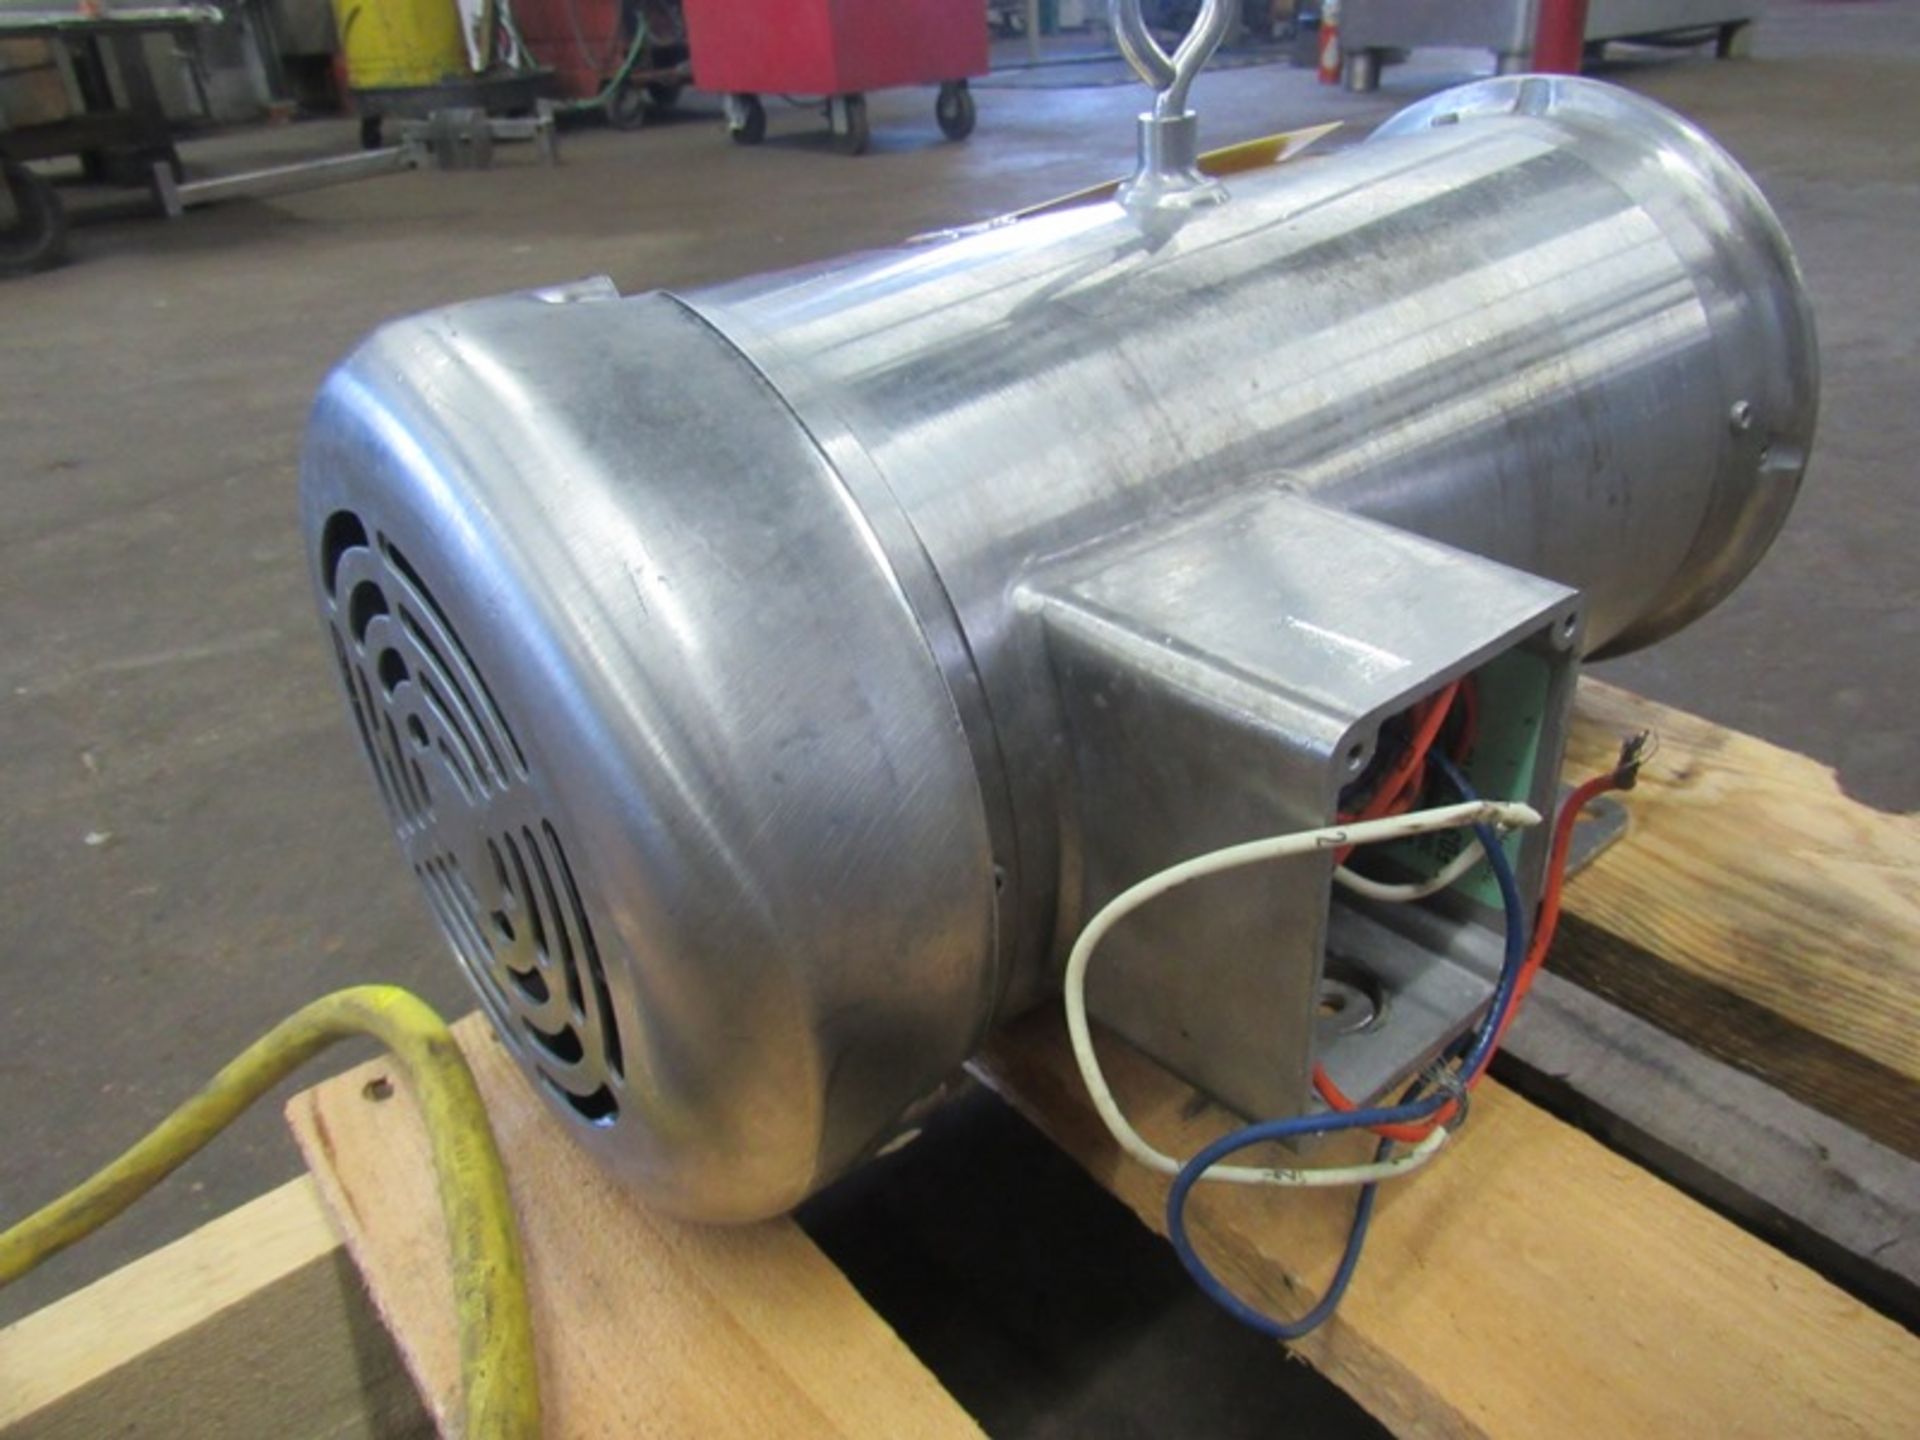 Baldor Mdl. CSSEWPM3615T Stainless Steel Motor, 5 h.p., 208/230/460 volts, 13.8 - 13/6.5 amps, 1750 - Image 2 of 2